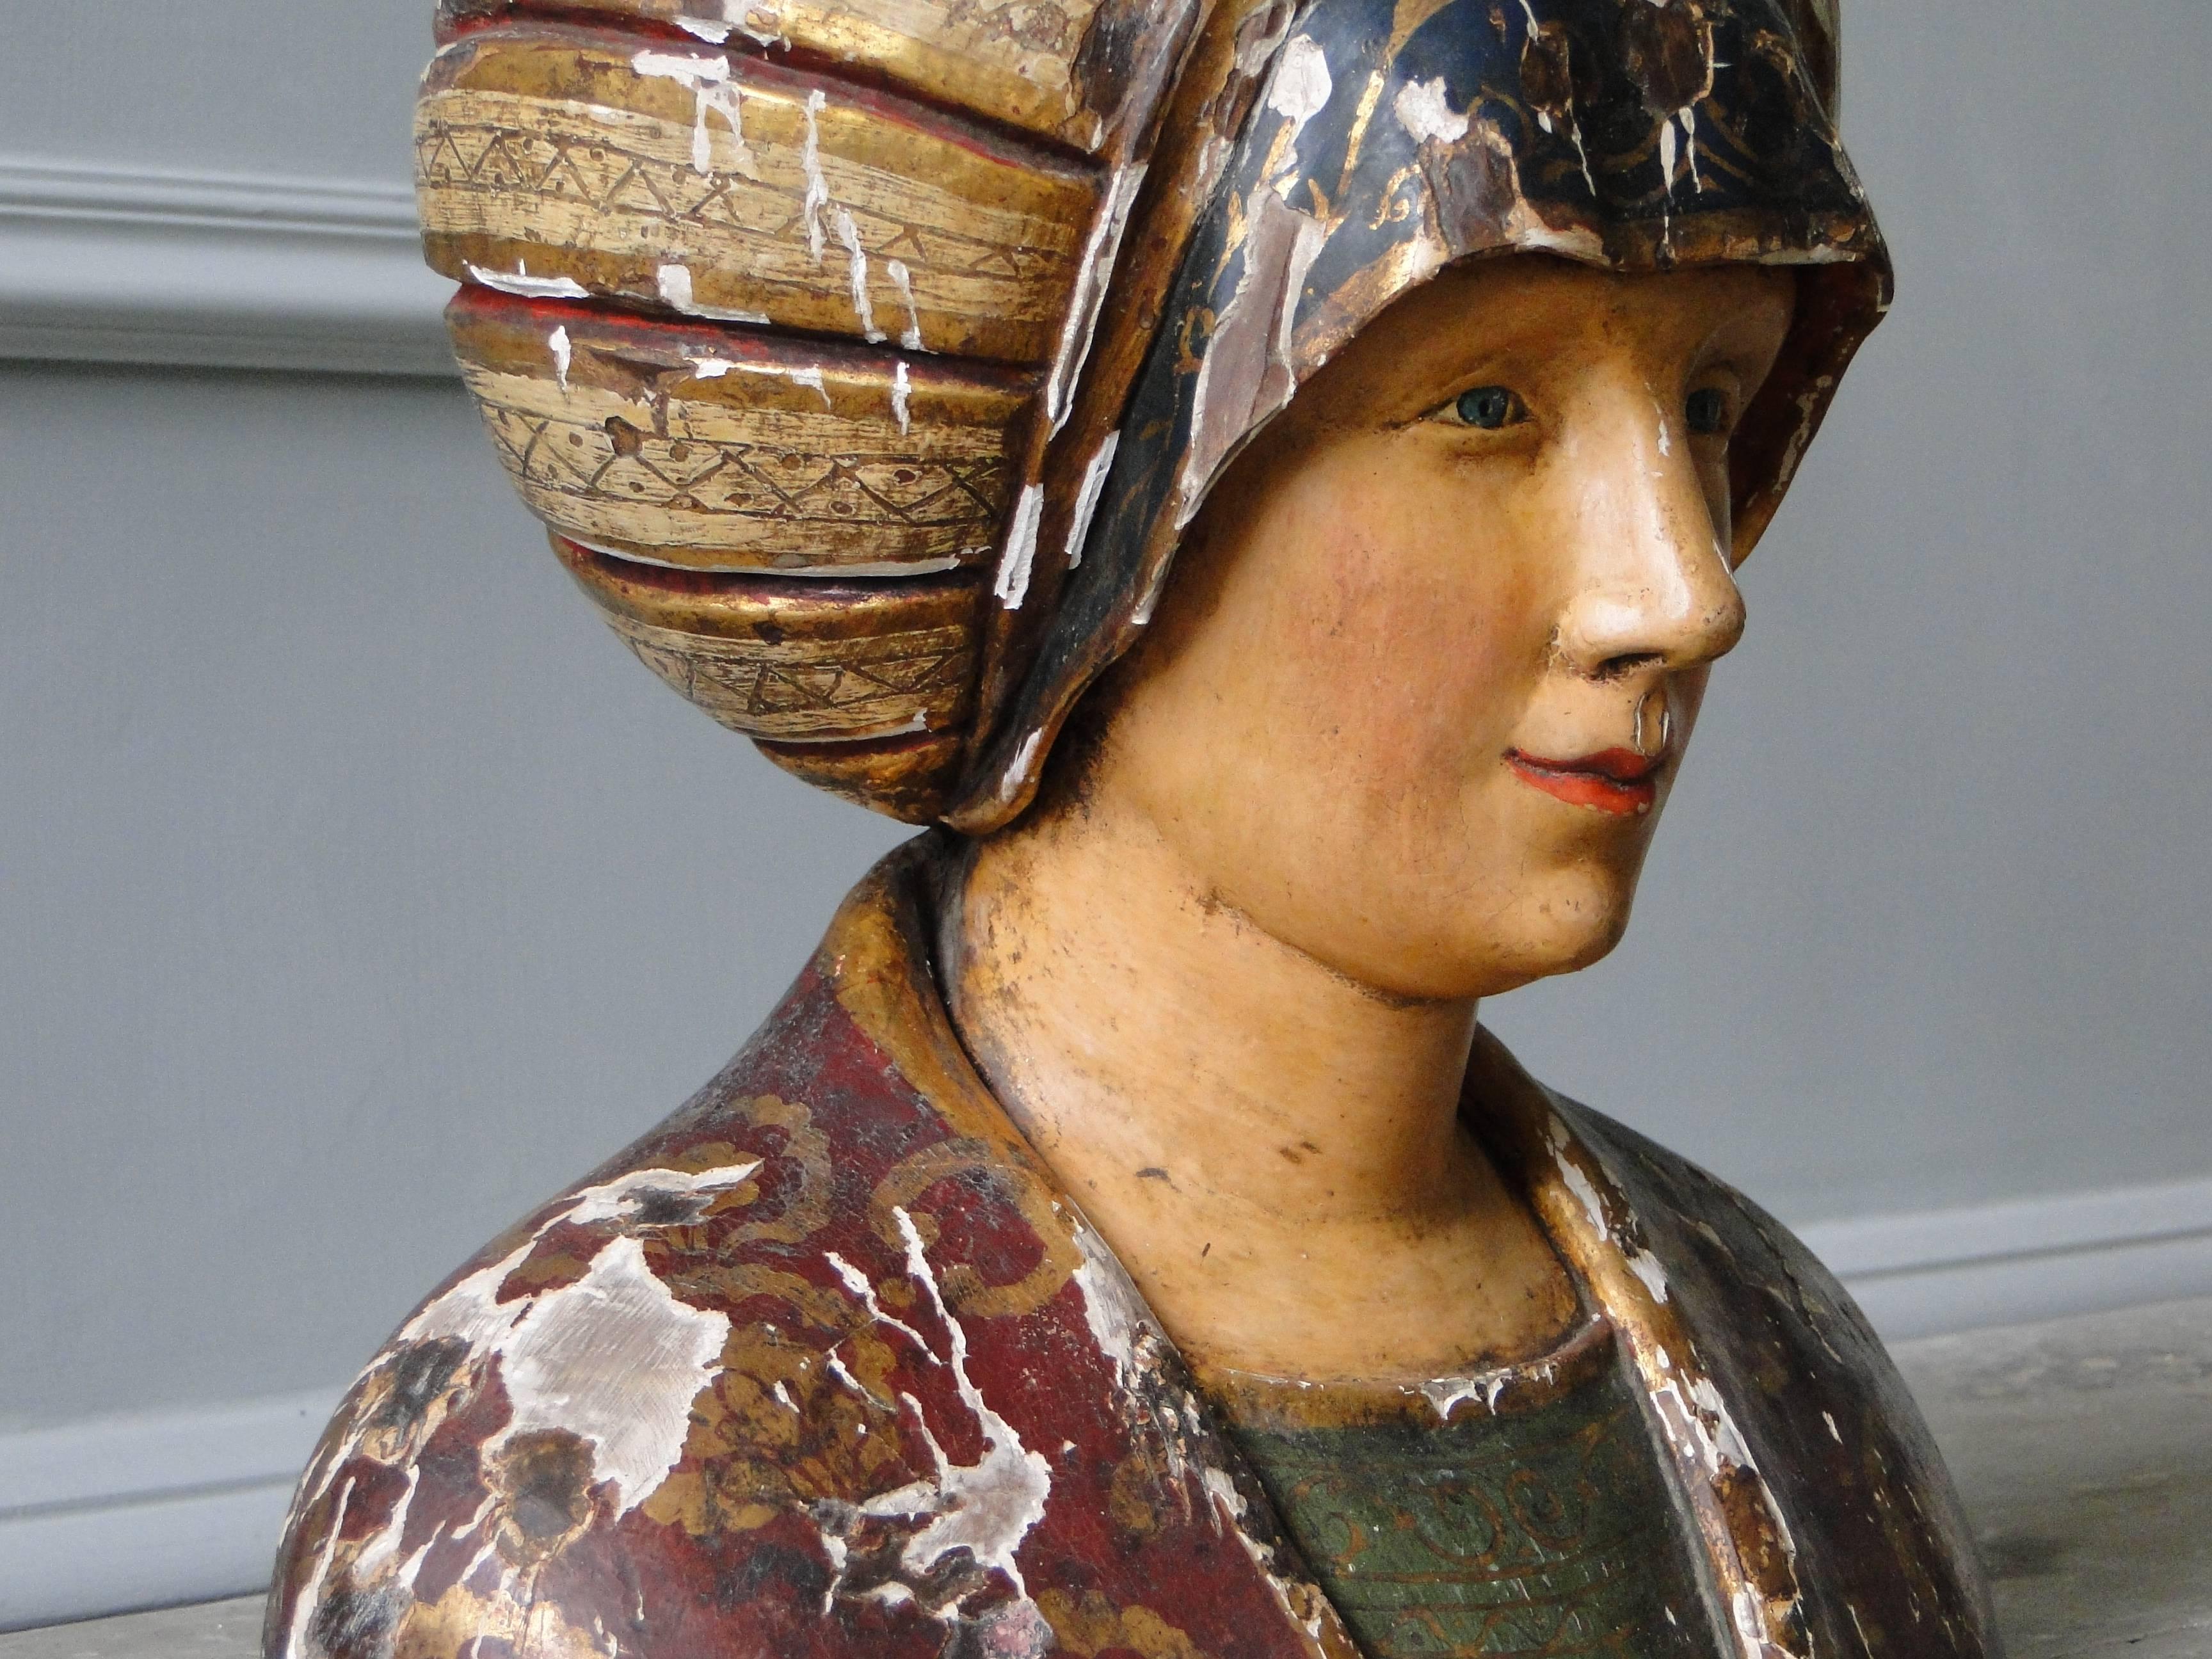 Polychromed Wooden Carved Statue or Bust from the 16th Century